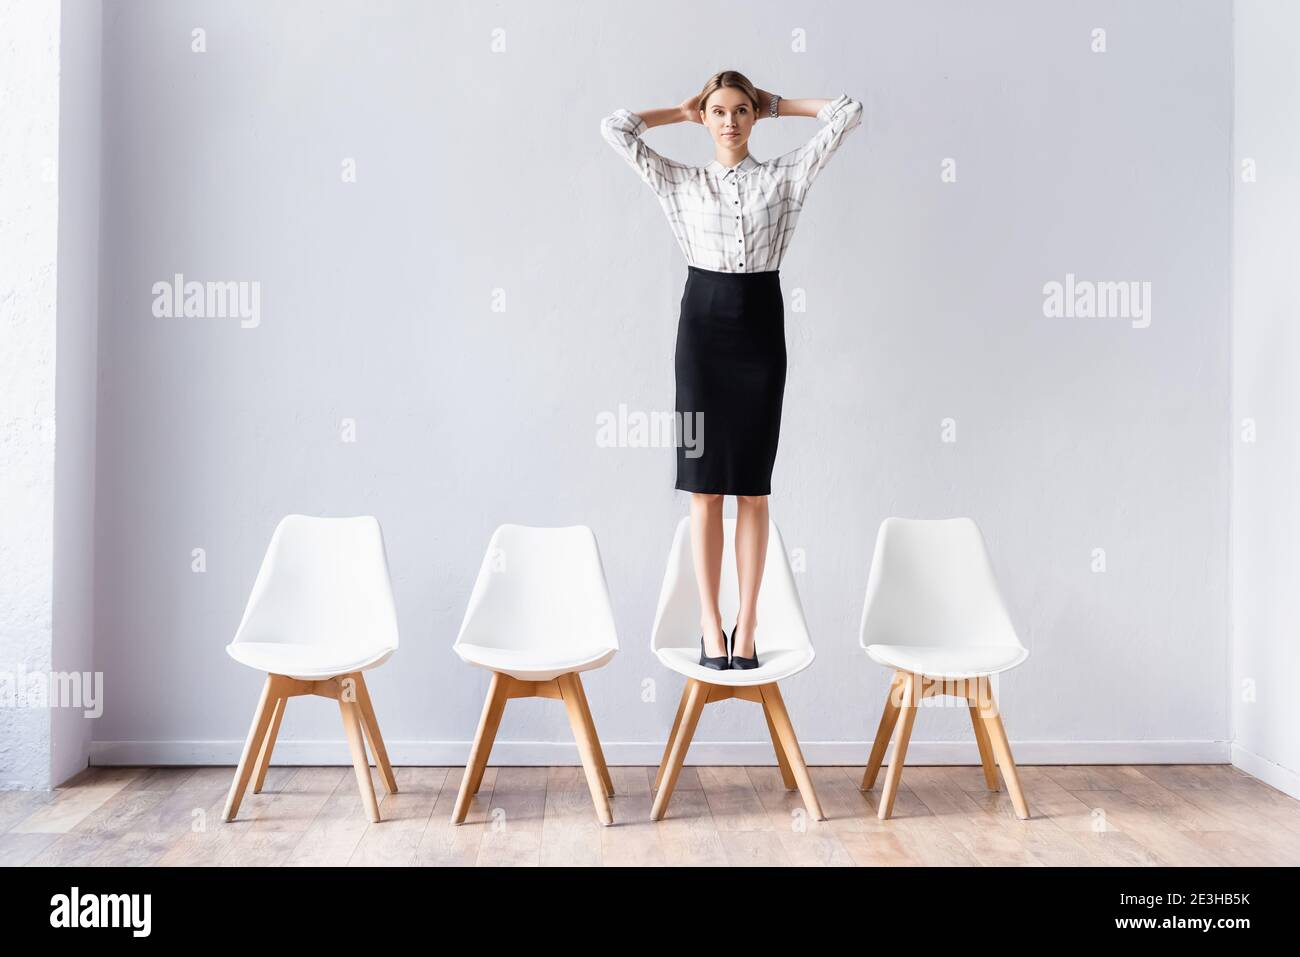 Businesswoman standing on chair and looking at camera in office hall Stock Photo